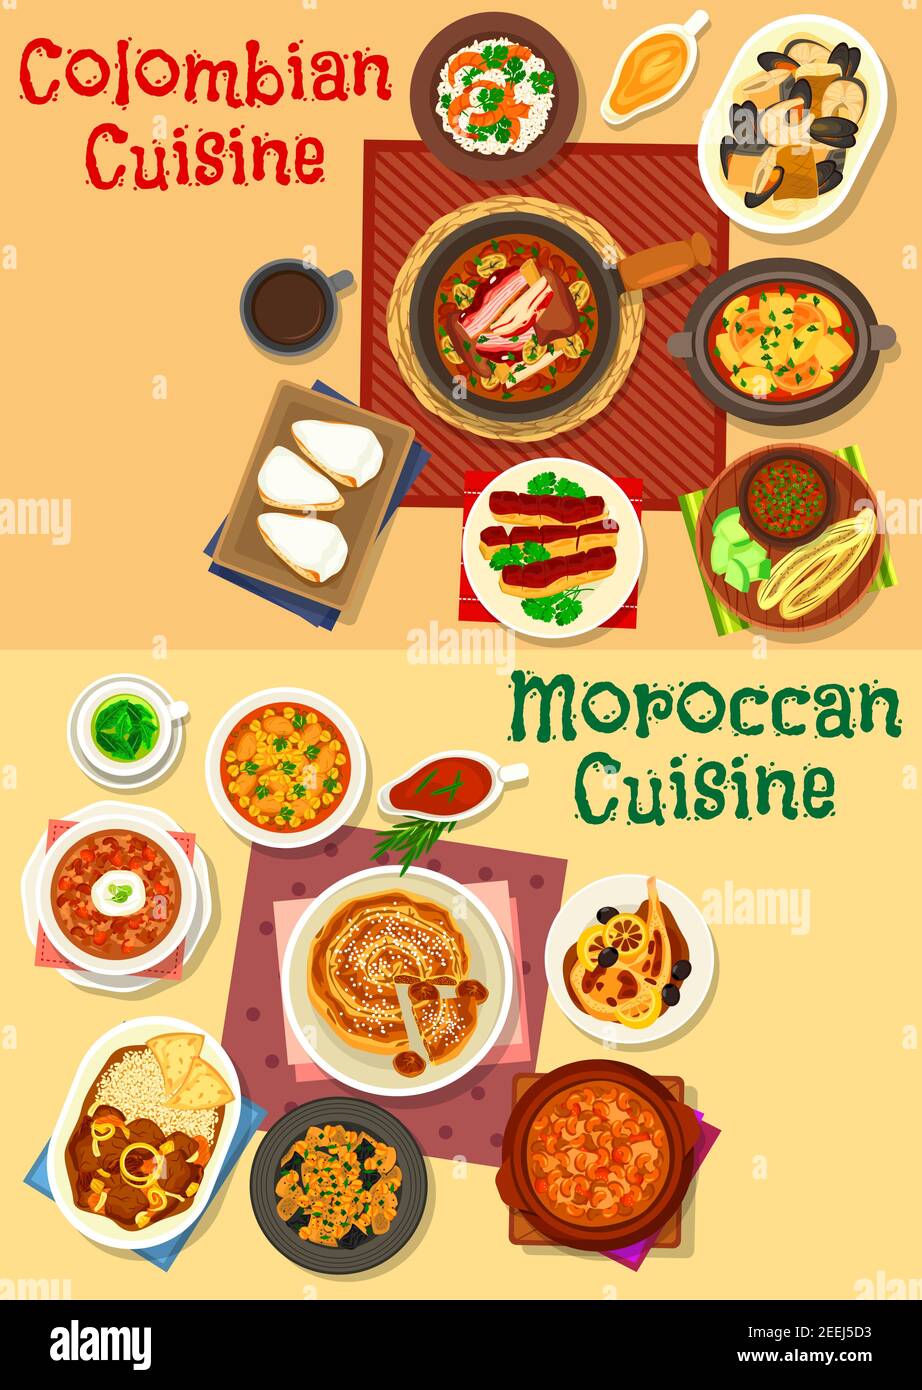 Colombian and moroccan cuisine icon set. Seafood and meat stew with bean, chicken soup, tomato onion sauce, shrimp rice, eggplant vegetable salad, fri Stock Vector